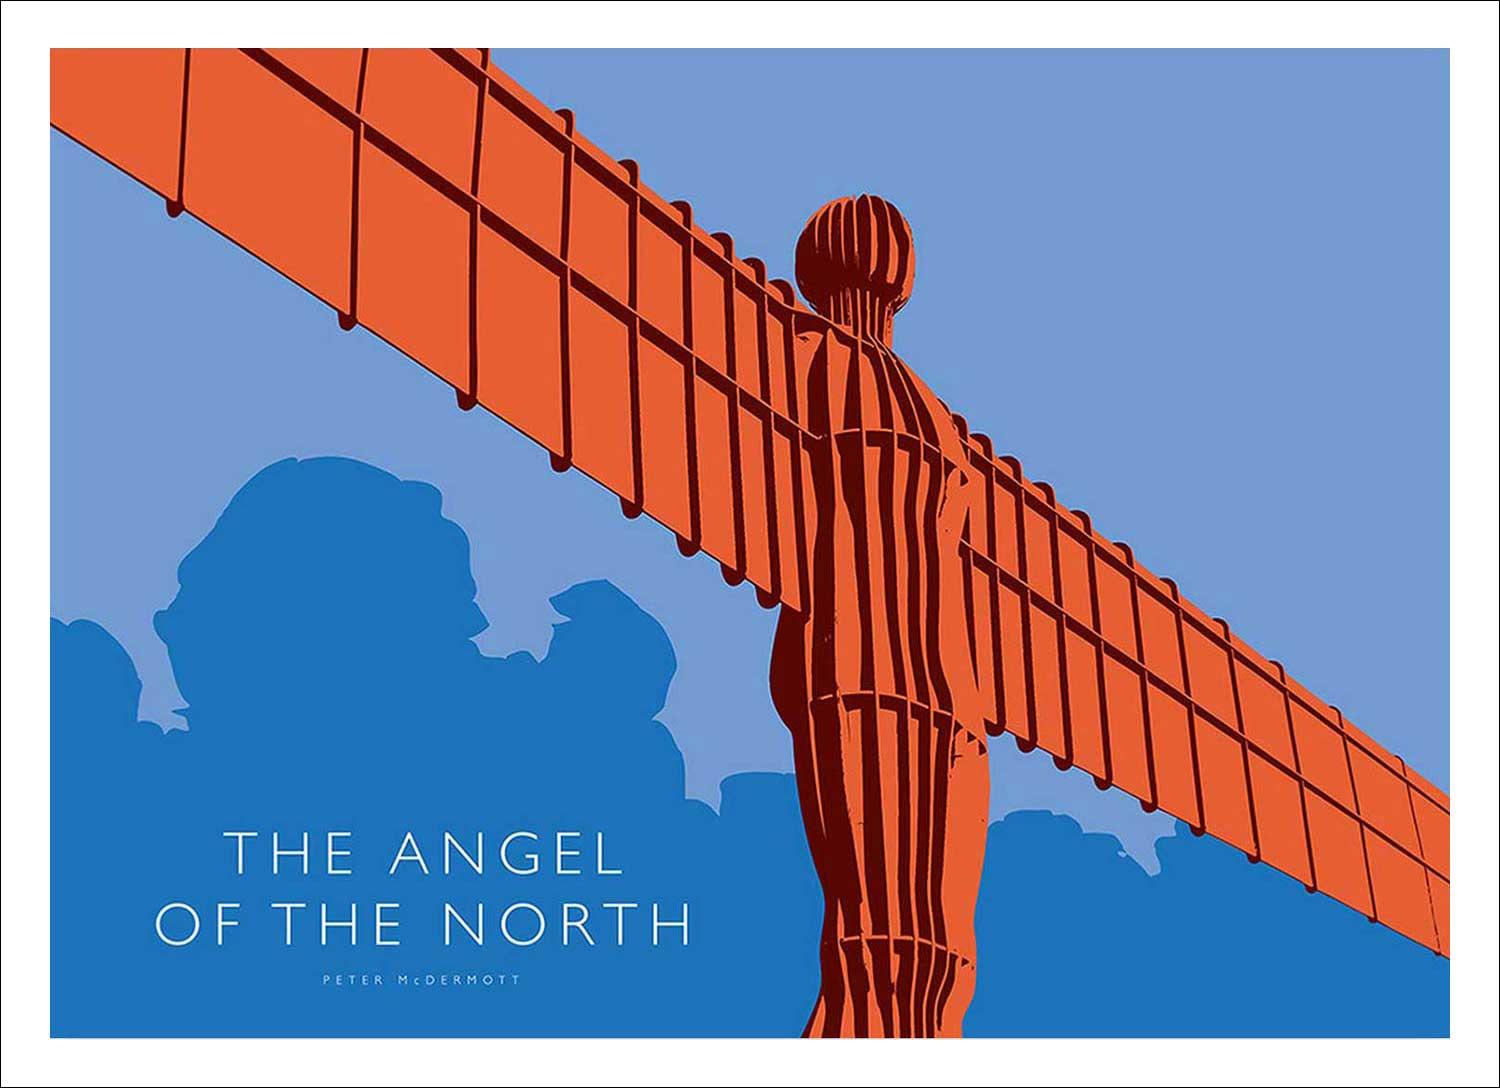 The Angel of the North Art Print from an original illustration by artist Peter McDermott